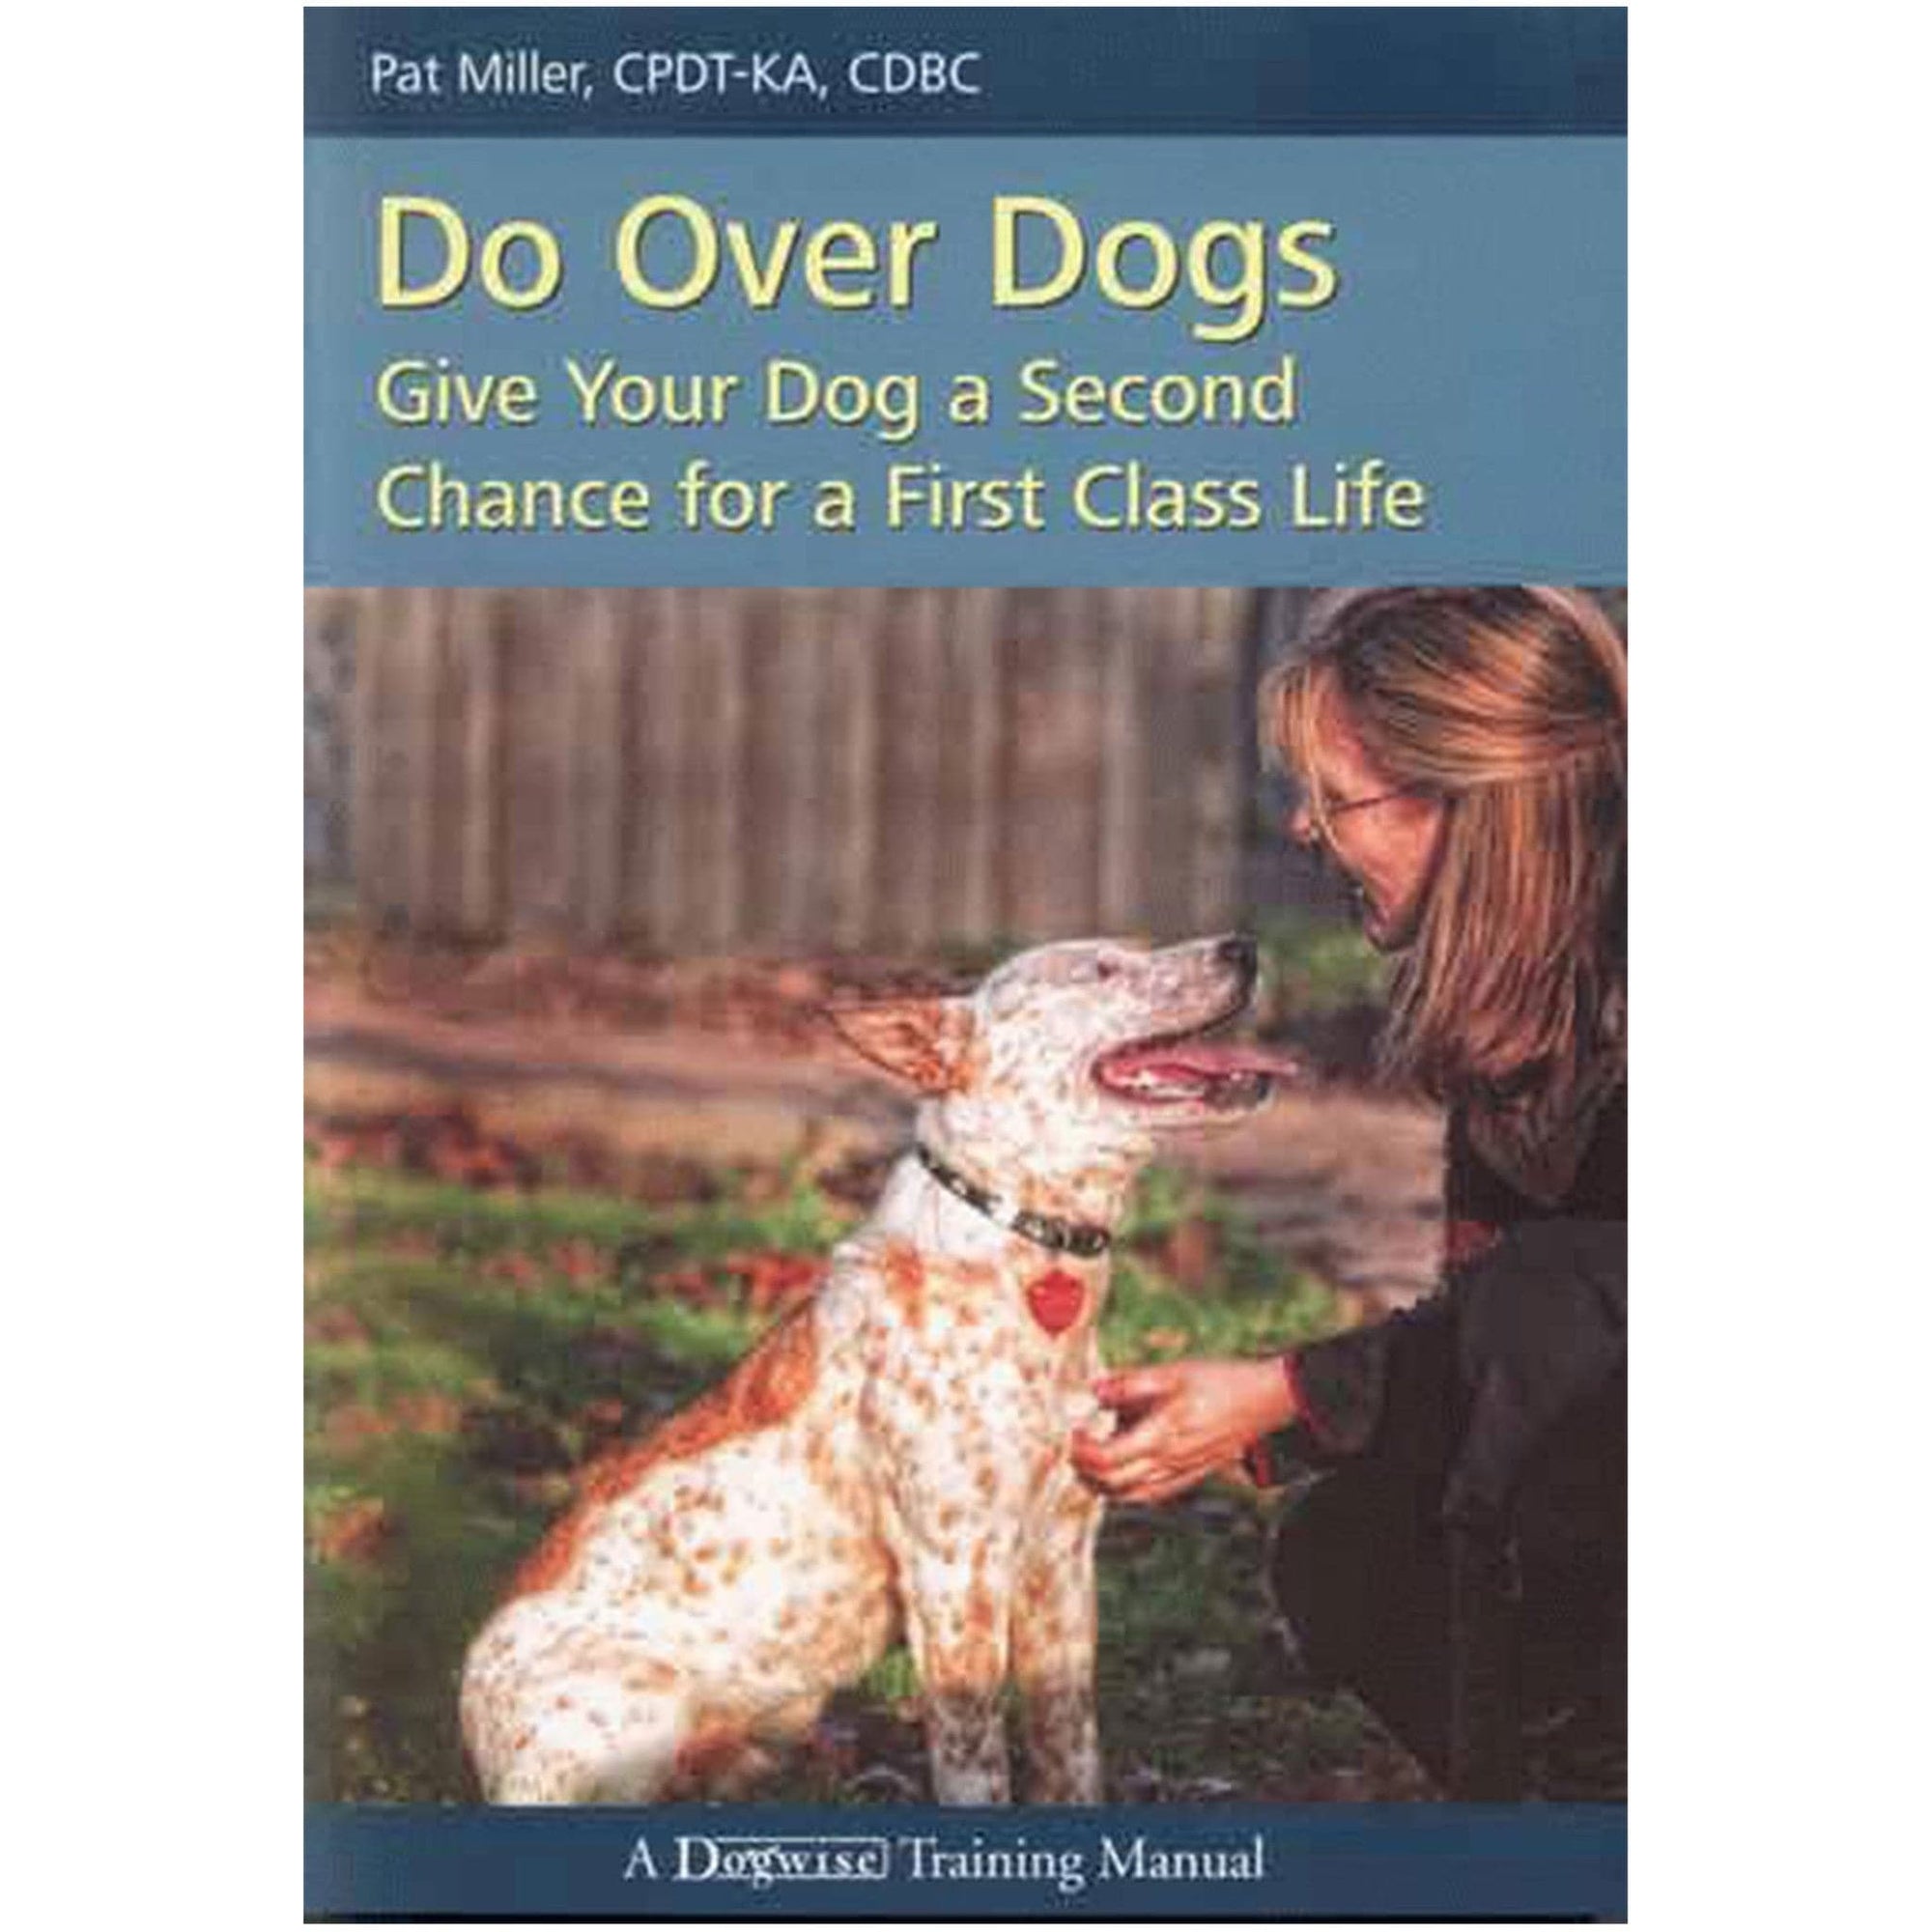 Do Over Dogs: Give Your Dog a Second Chance for a First Class Life  e-book